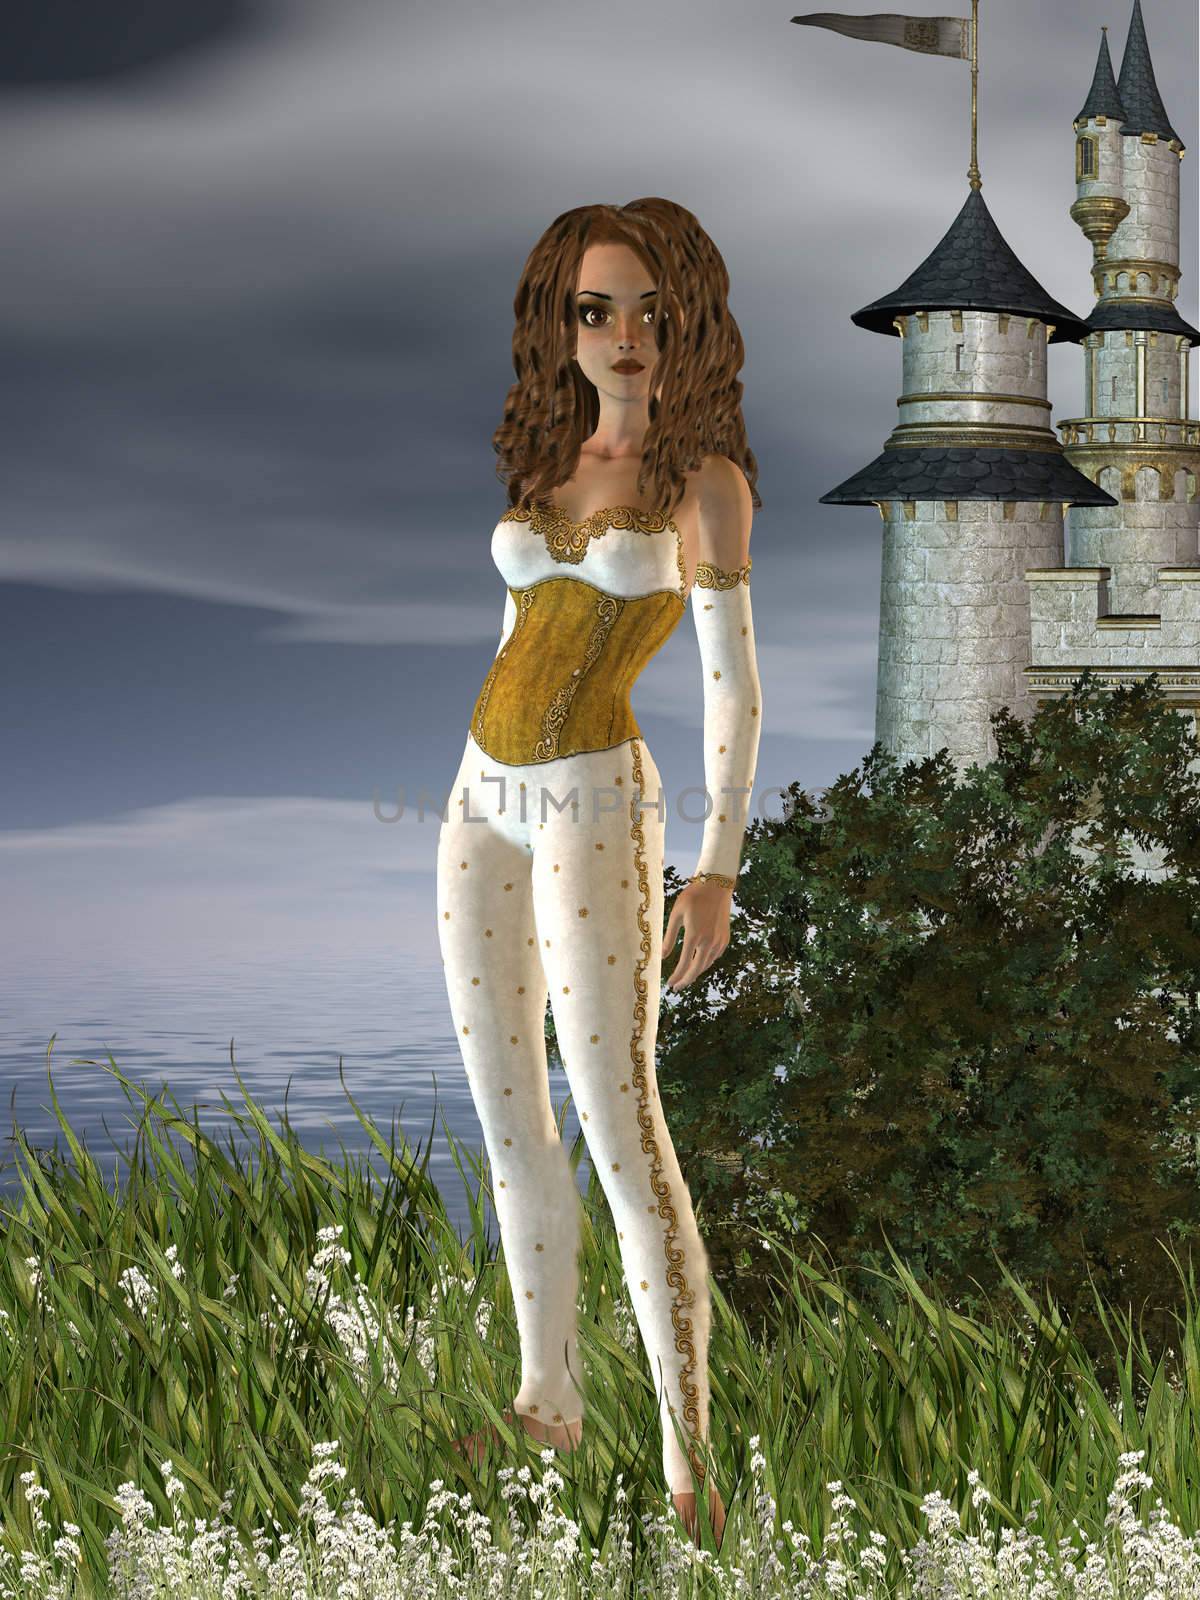 A girl standing in a field in front of a castle